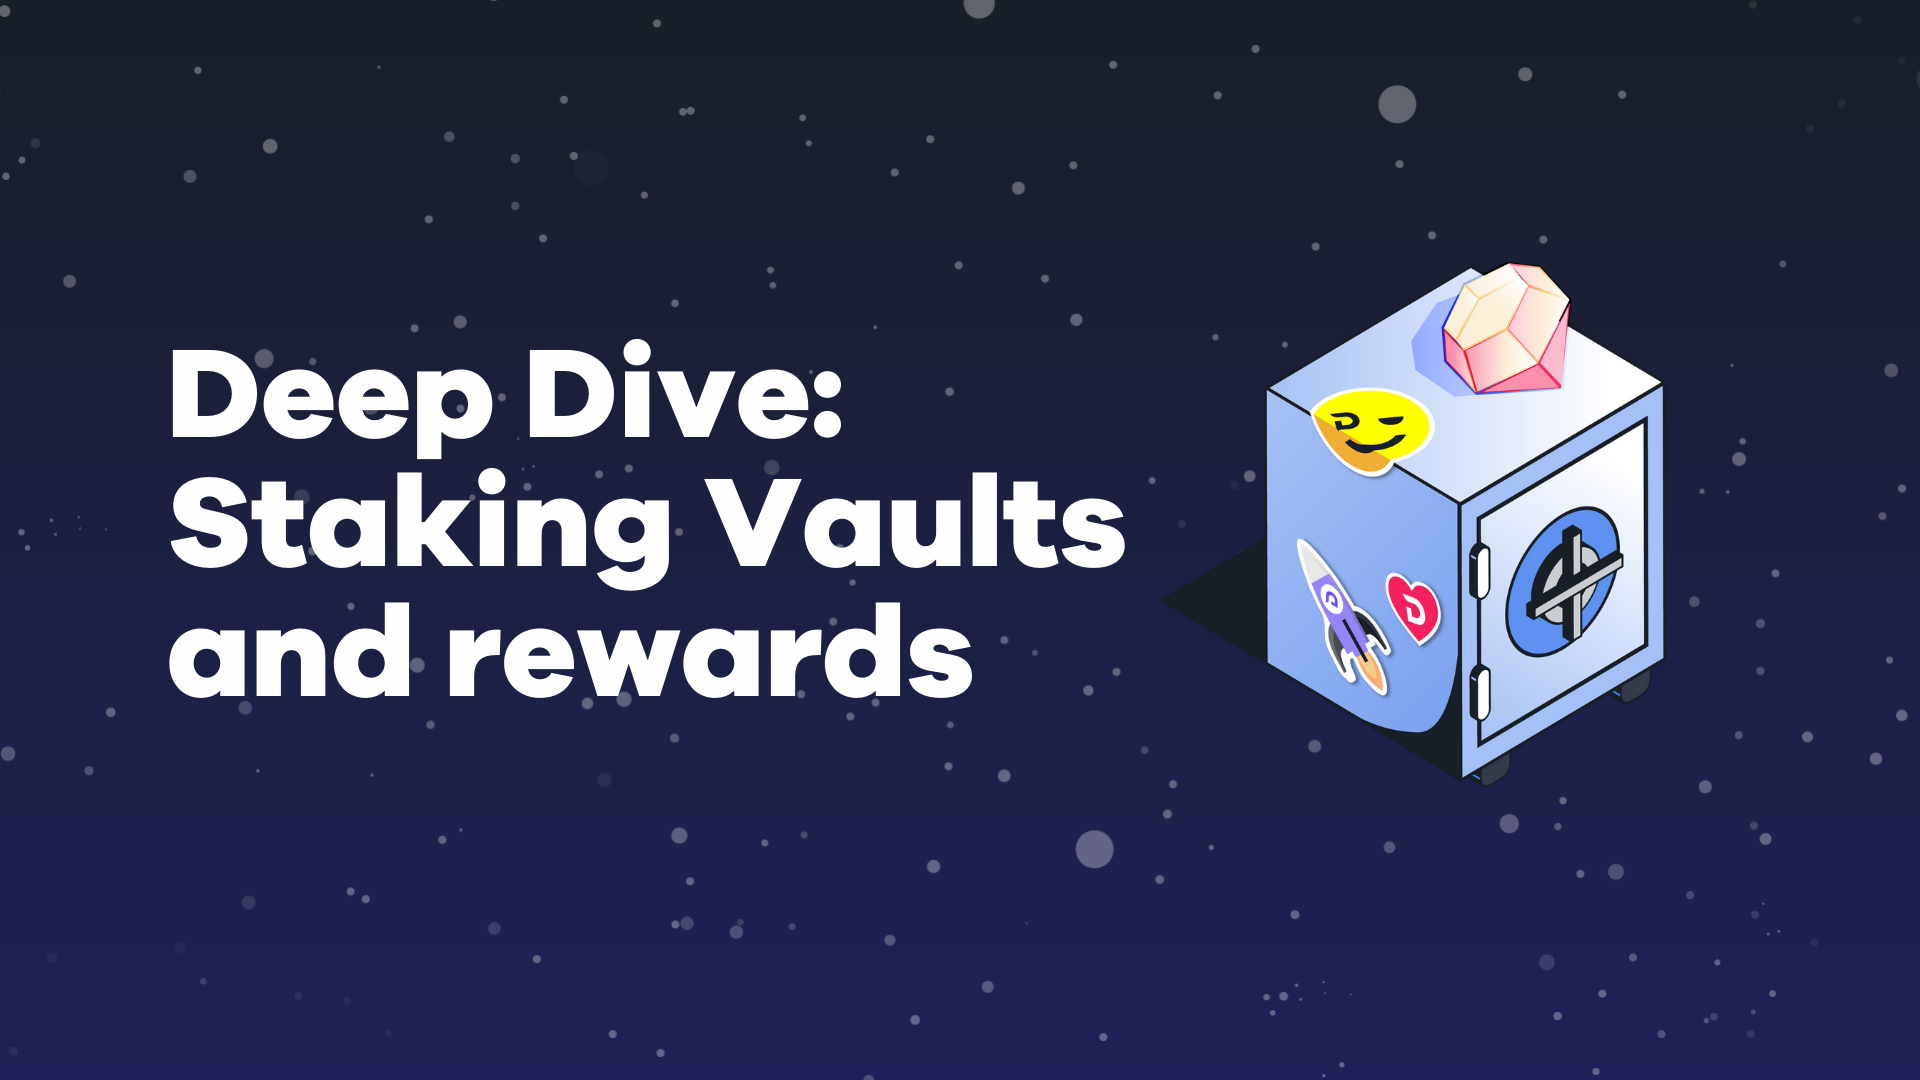 Deep Dive: Staking Vaults and rewards 